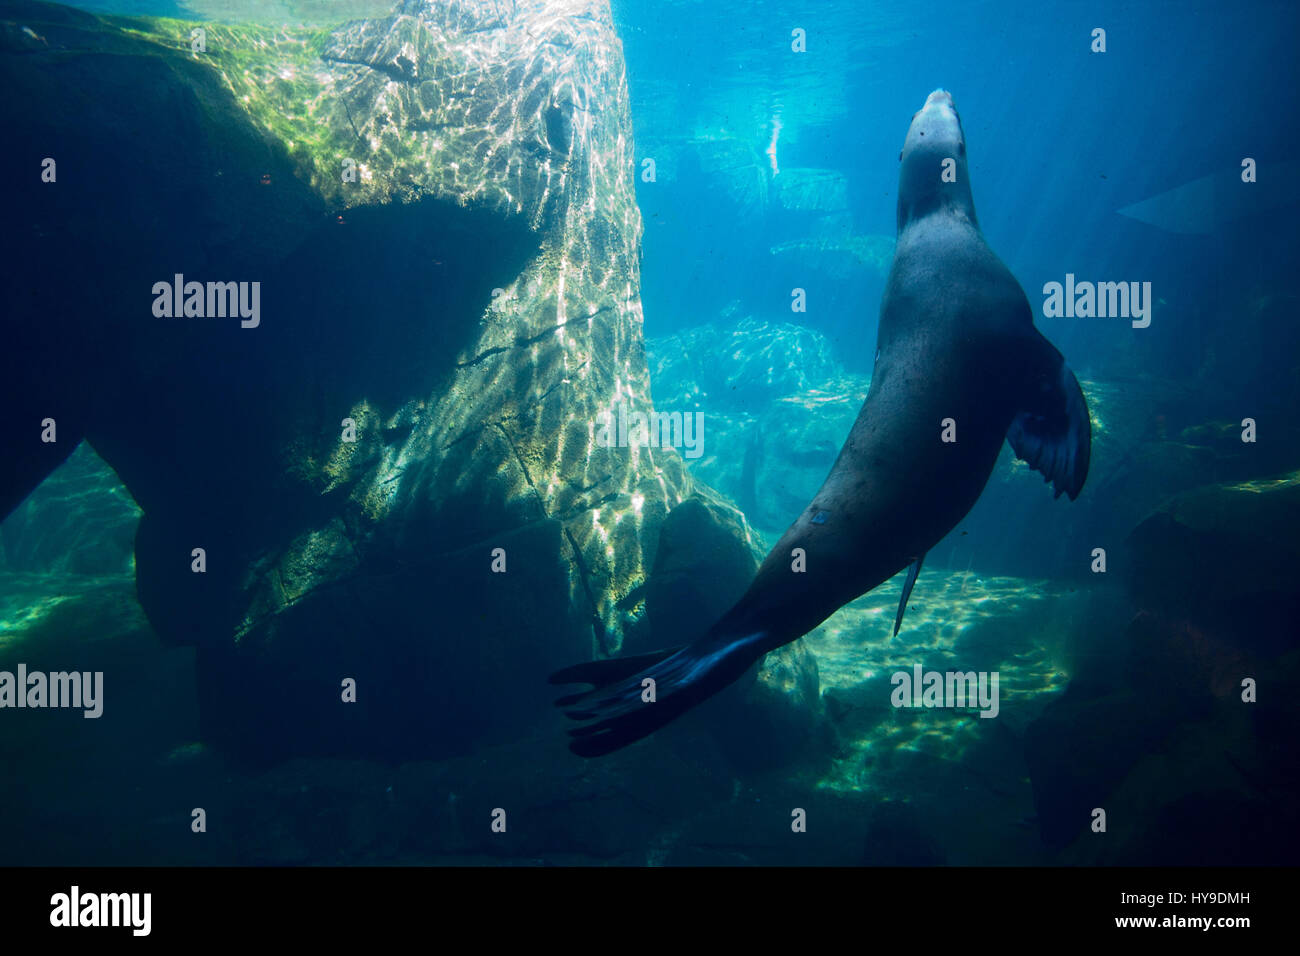 A sea lion swims through and underwater landscape. Stock Photo